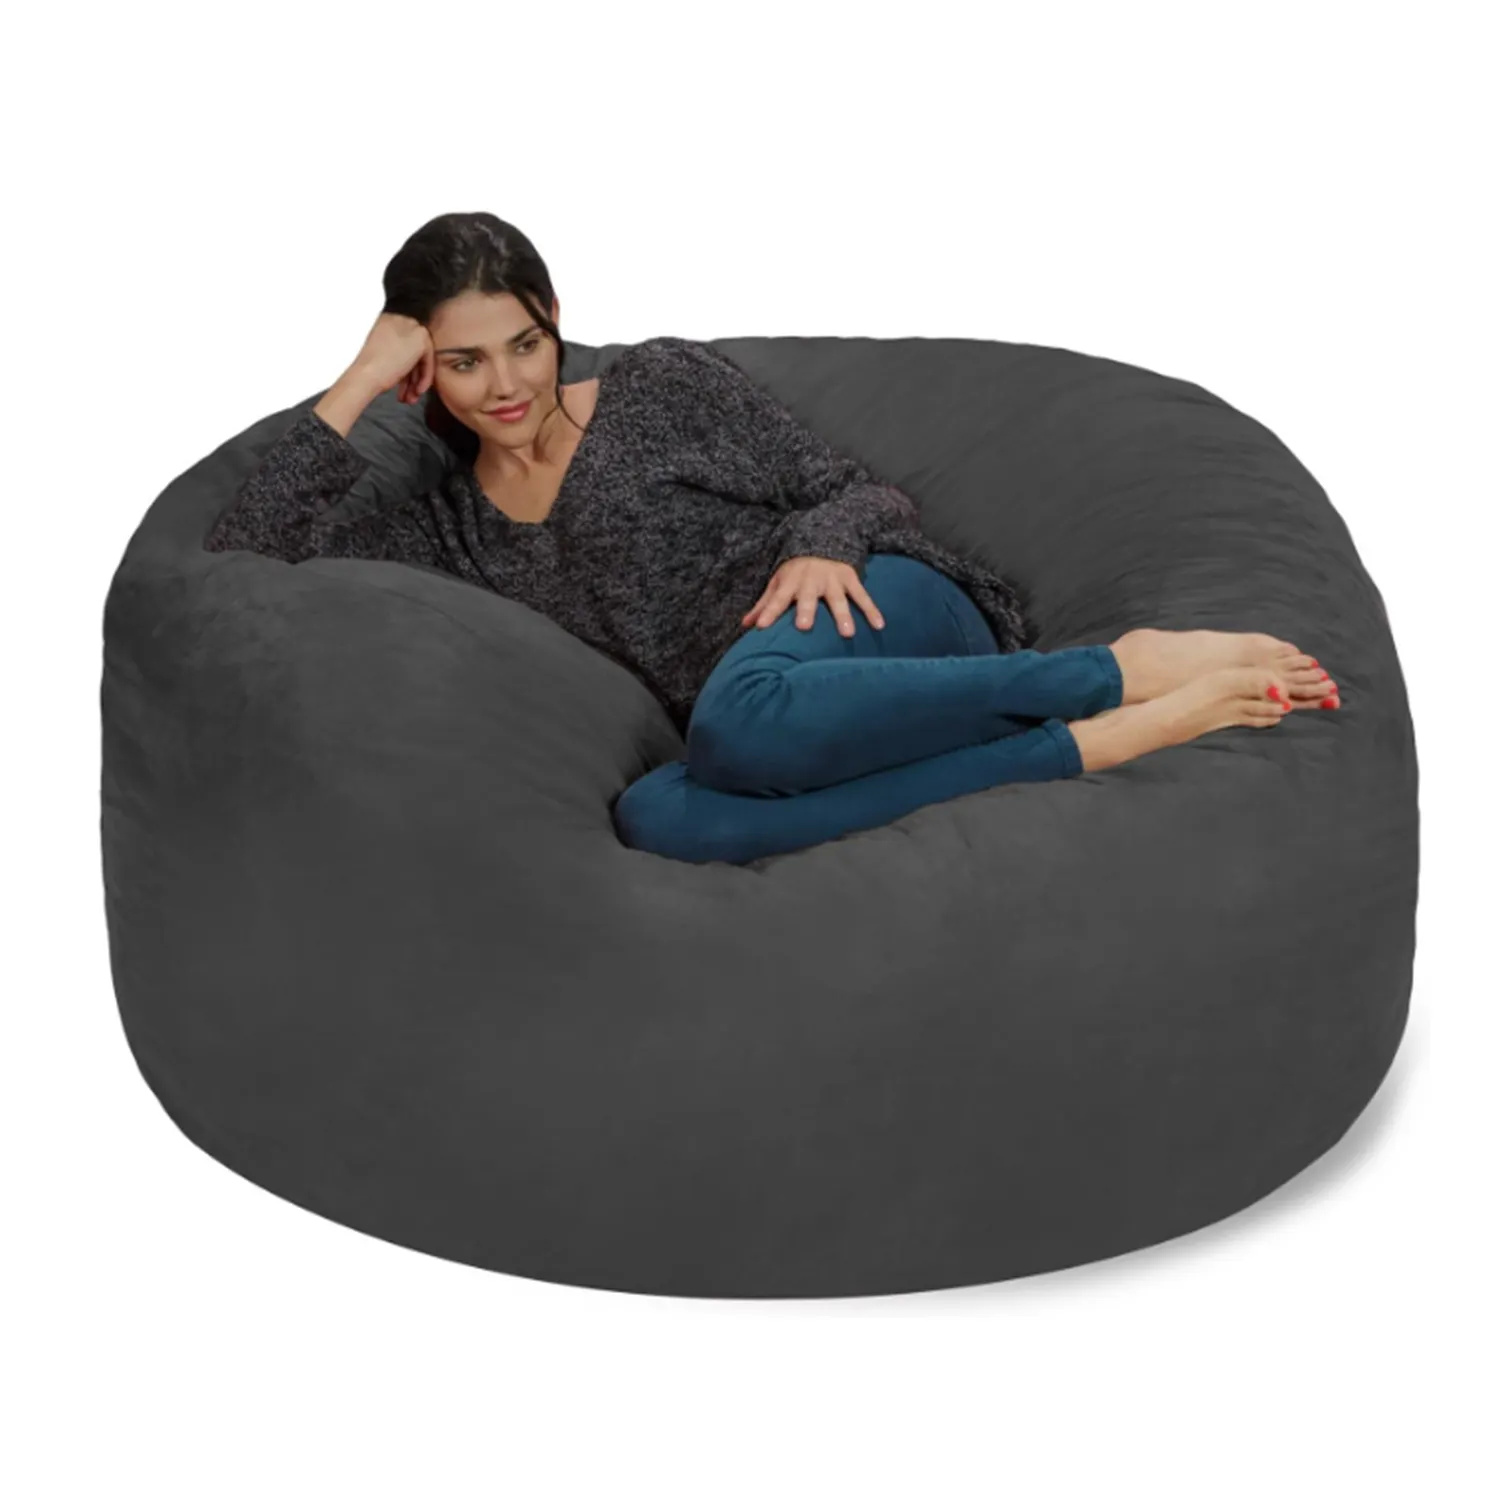 YUNJIN Customized Big 5FT Bean Bag Chair Cover(No Filling) for Adults/Giant Lazy Sofa Cover/Large Living Room Furniture